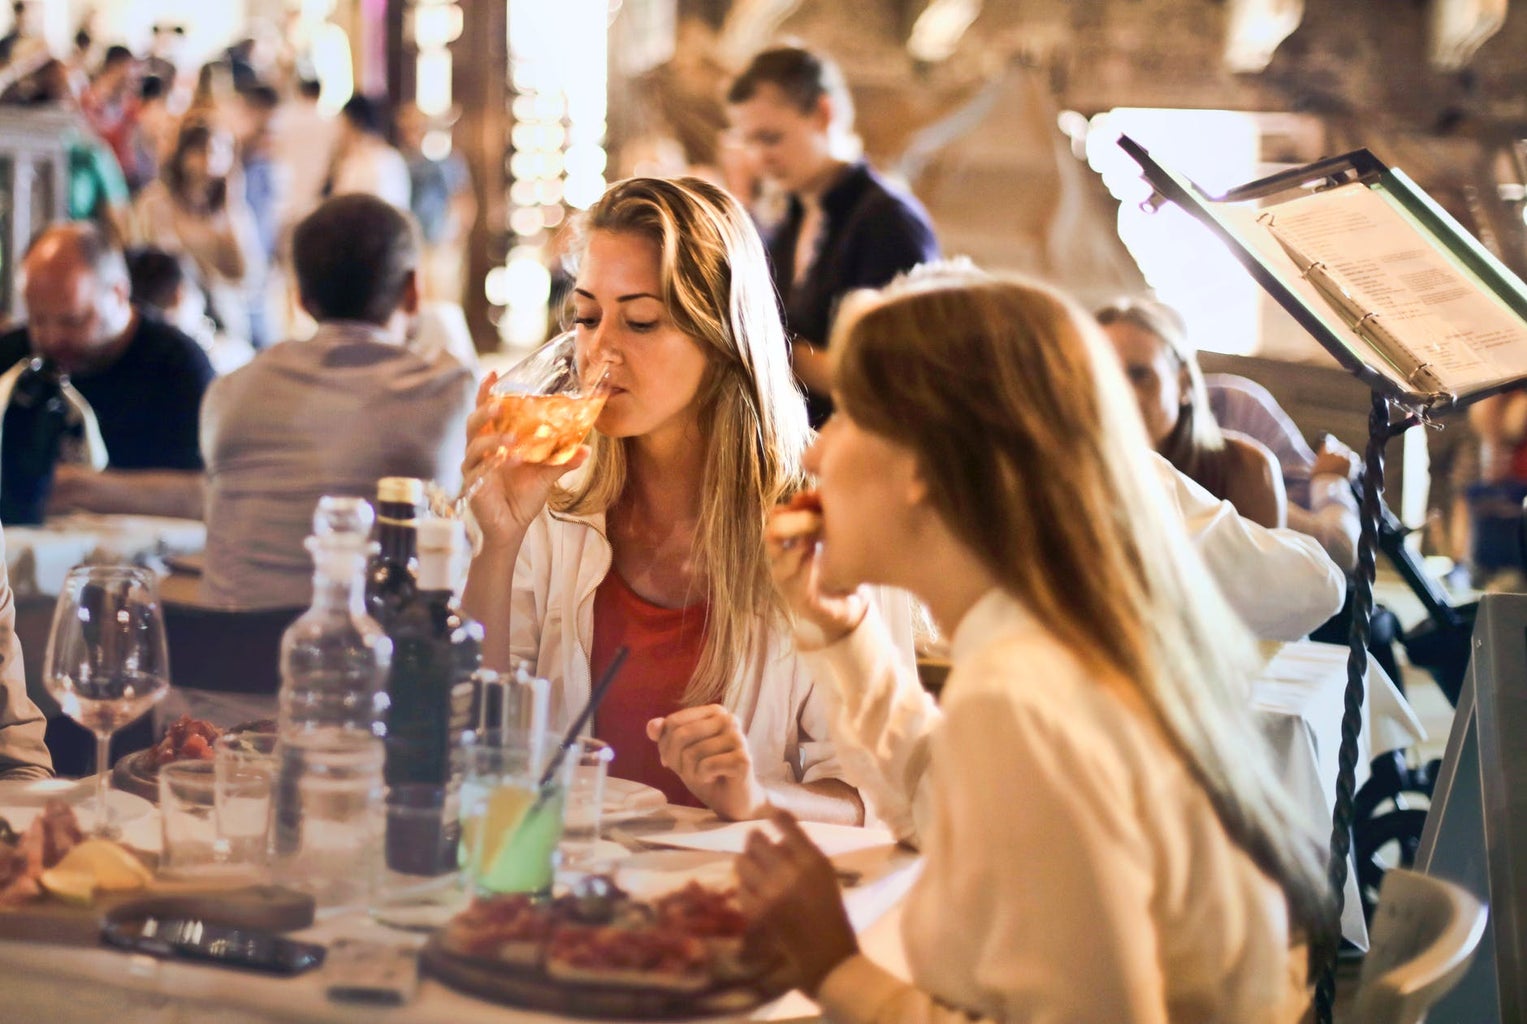 women eating and drinking wine in a restaurant